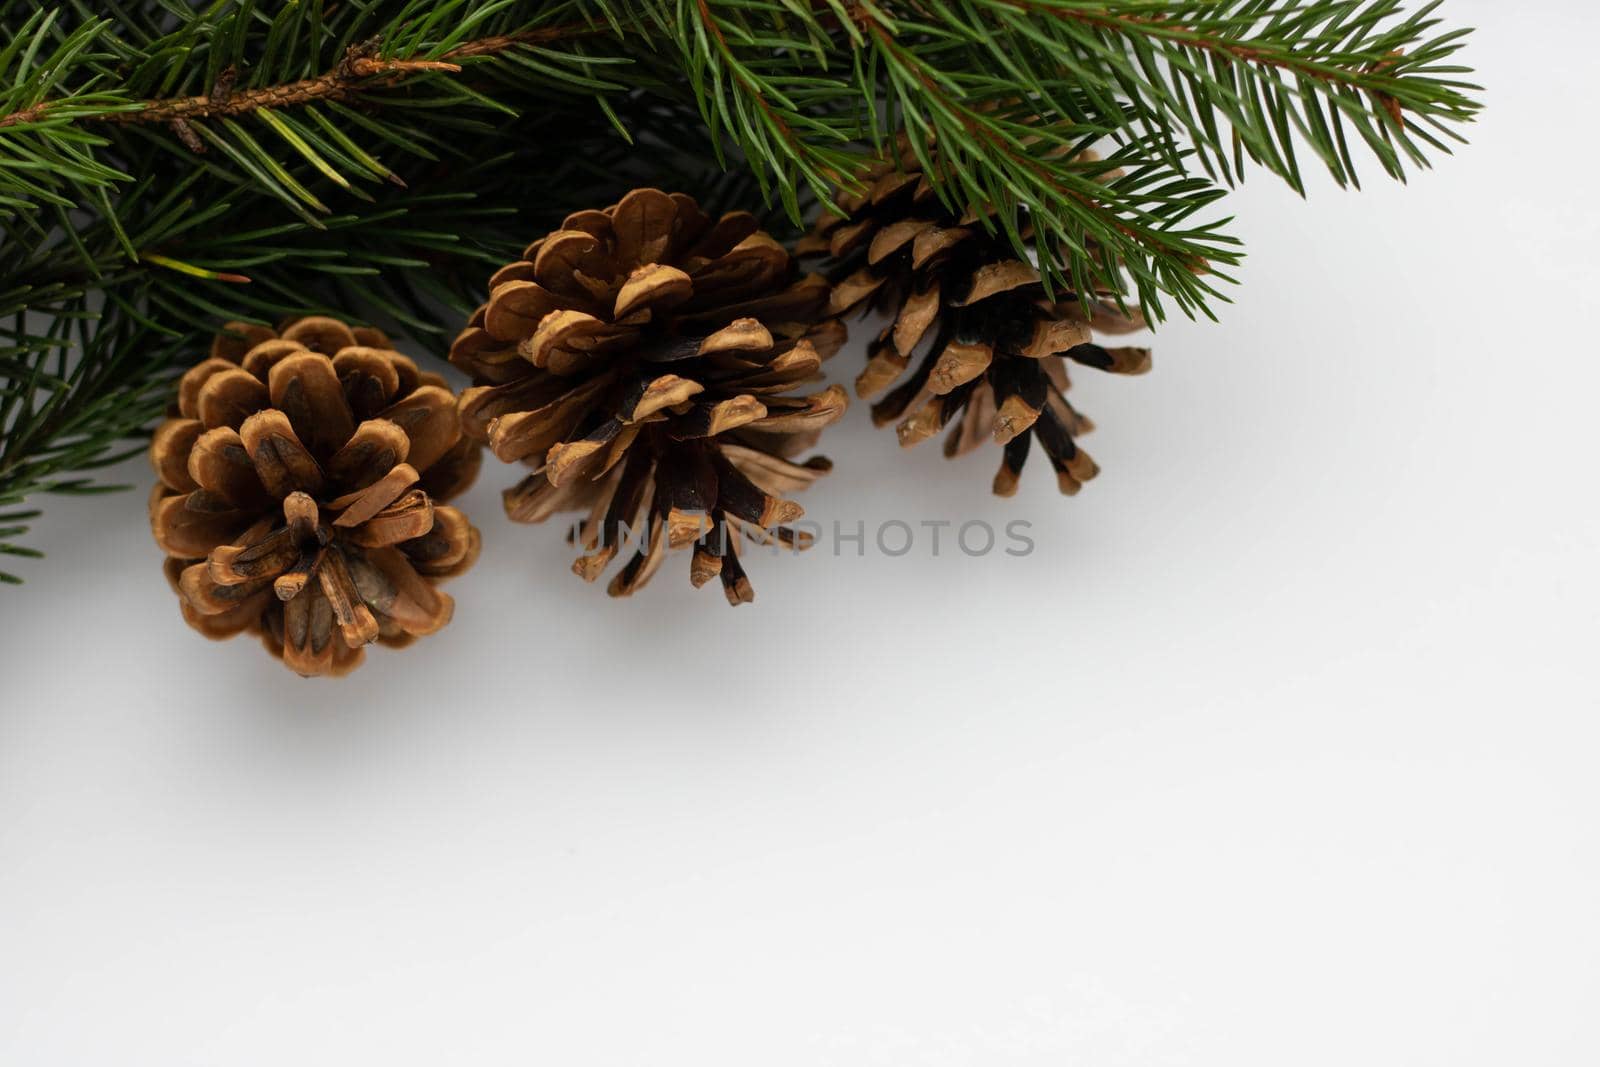 Fir branches with cones in the corner on a white background isolated. New Year card template by lapushka62